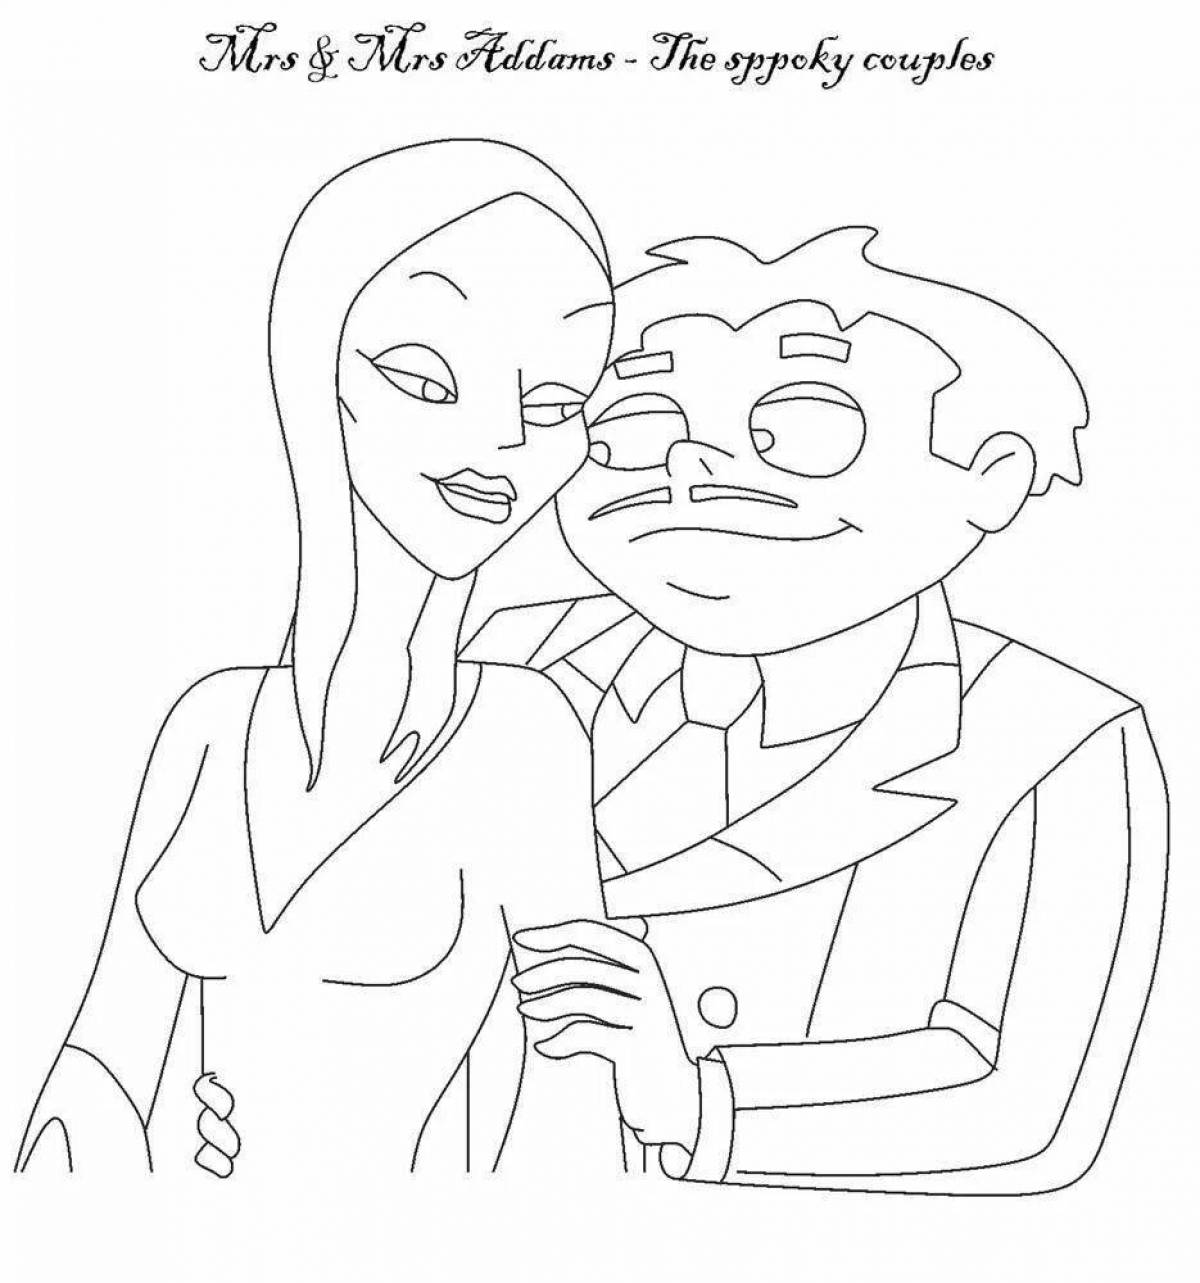 Playful addams family coloring page for kids